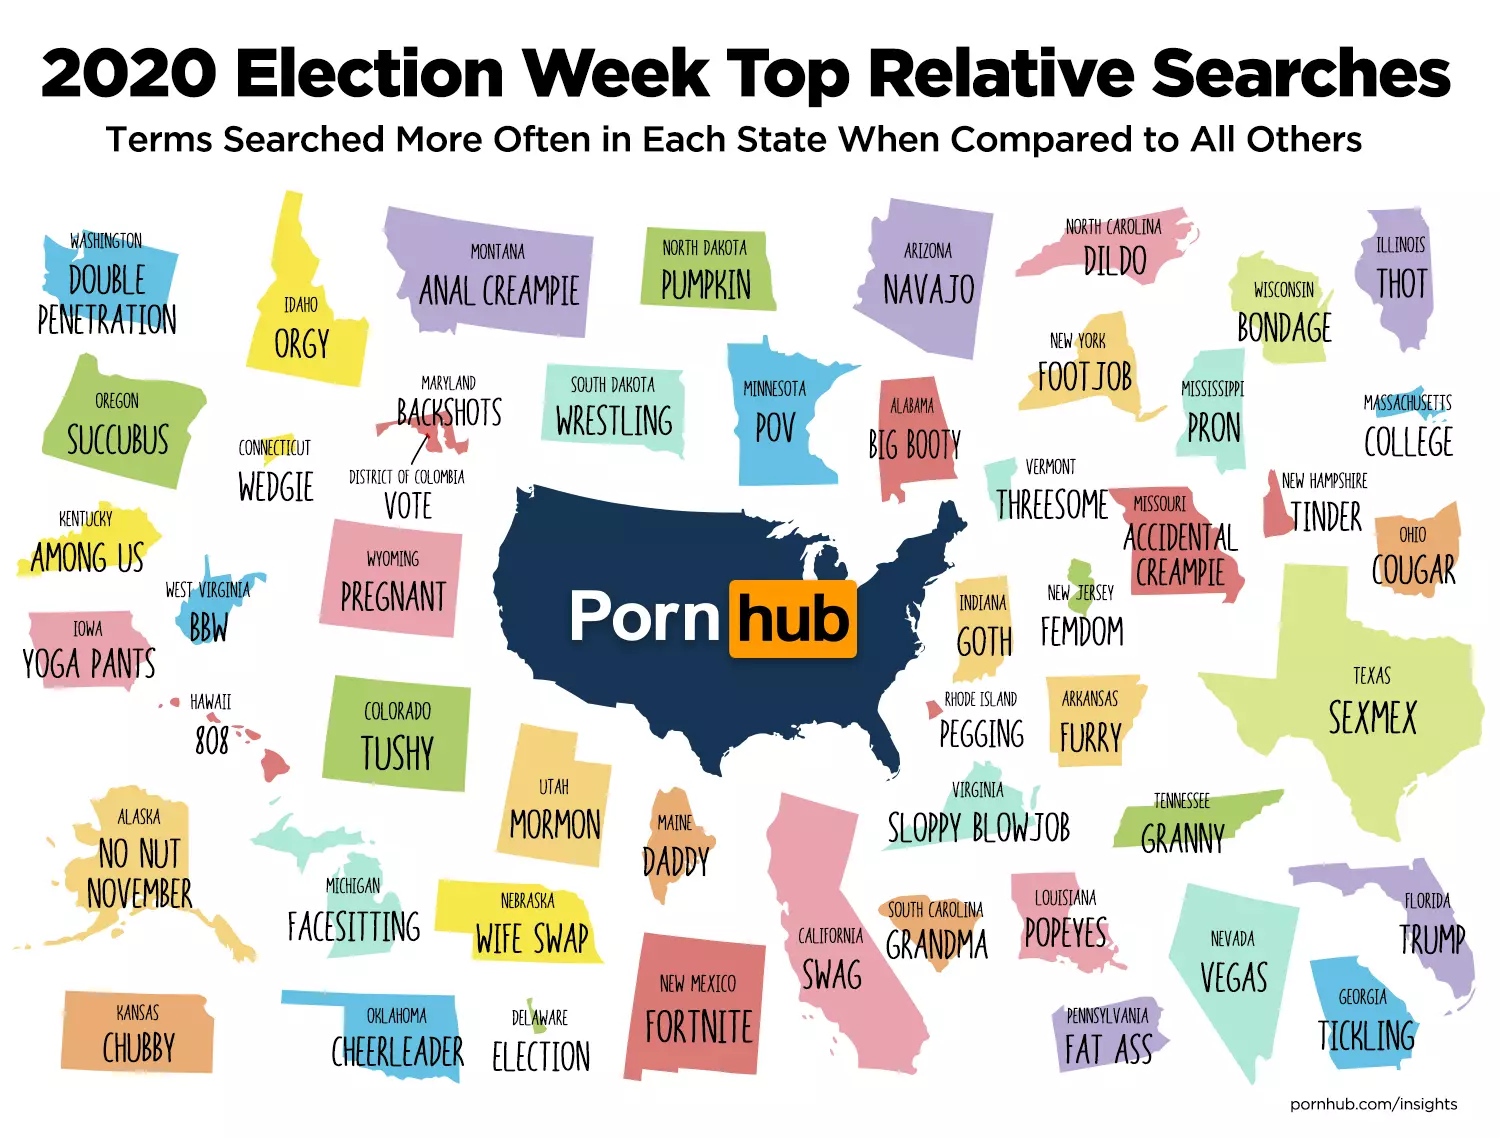 PornHub's search data for the United States during Election Week /